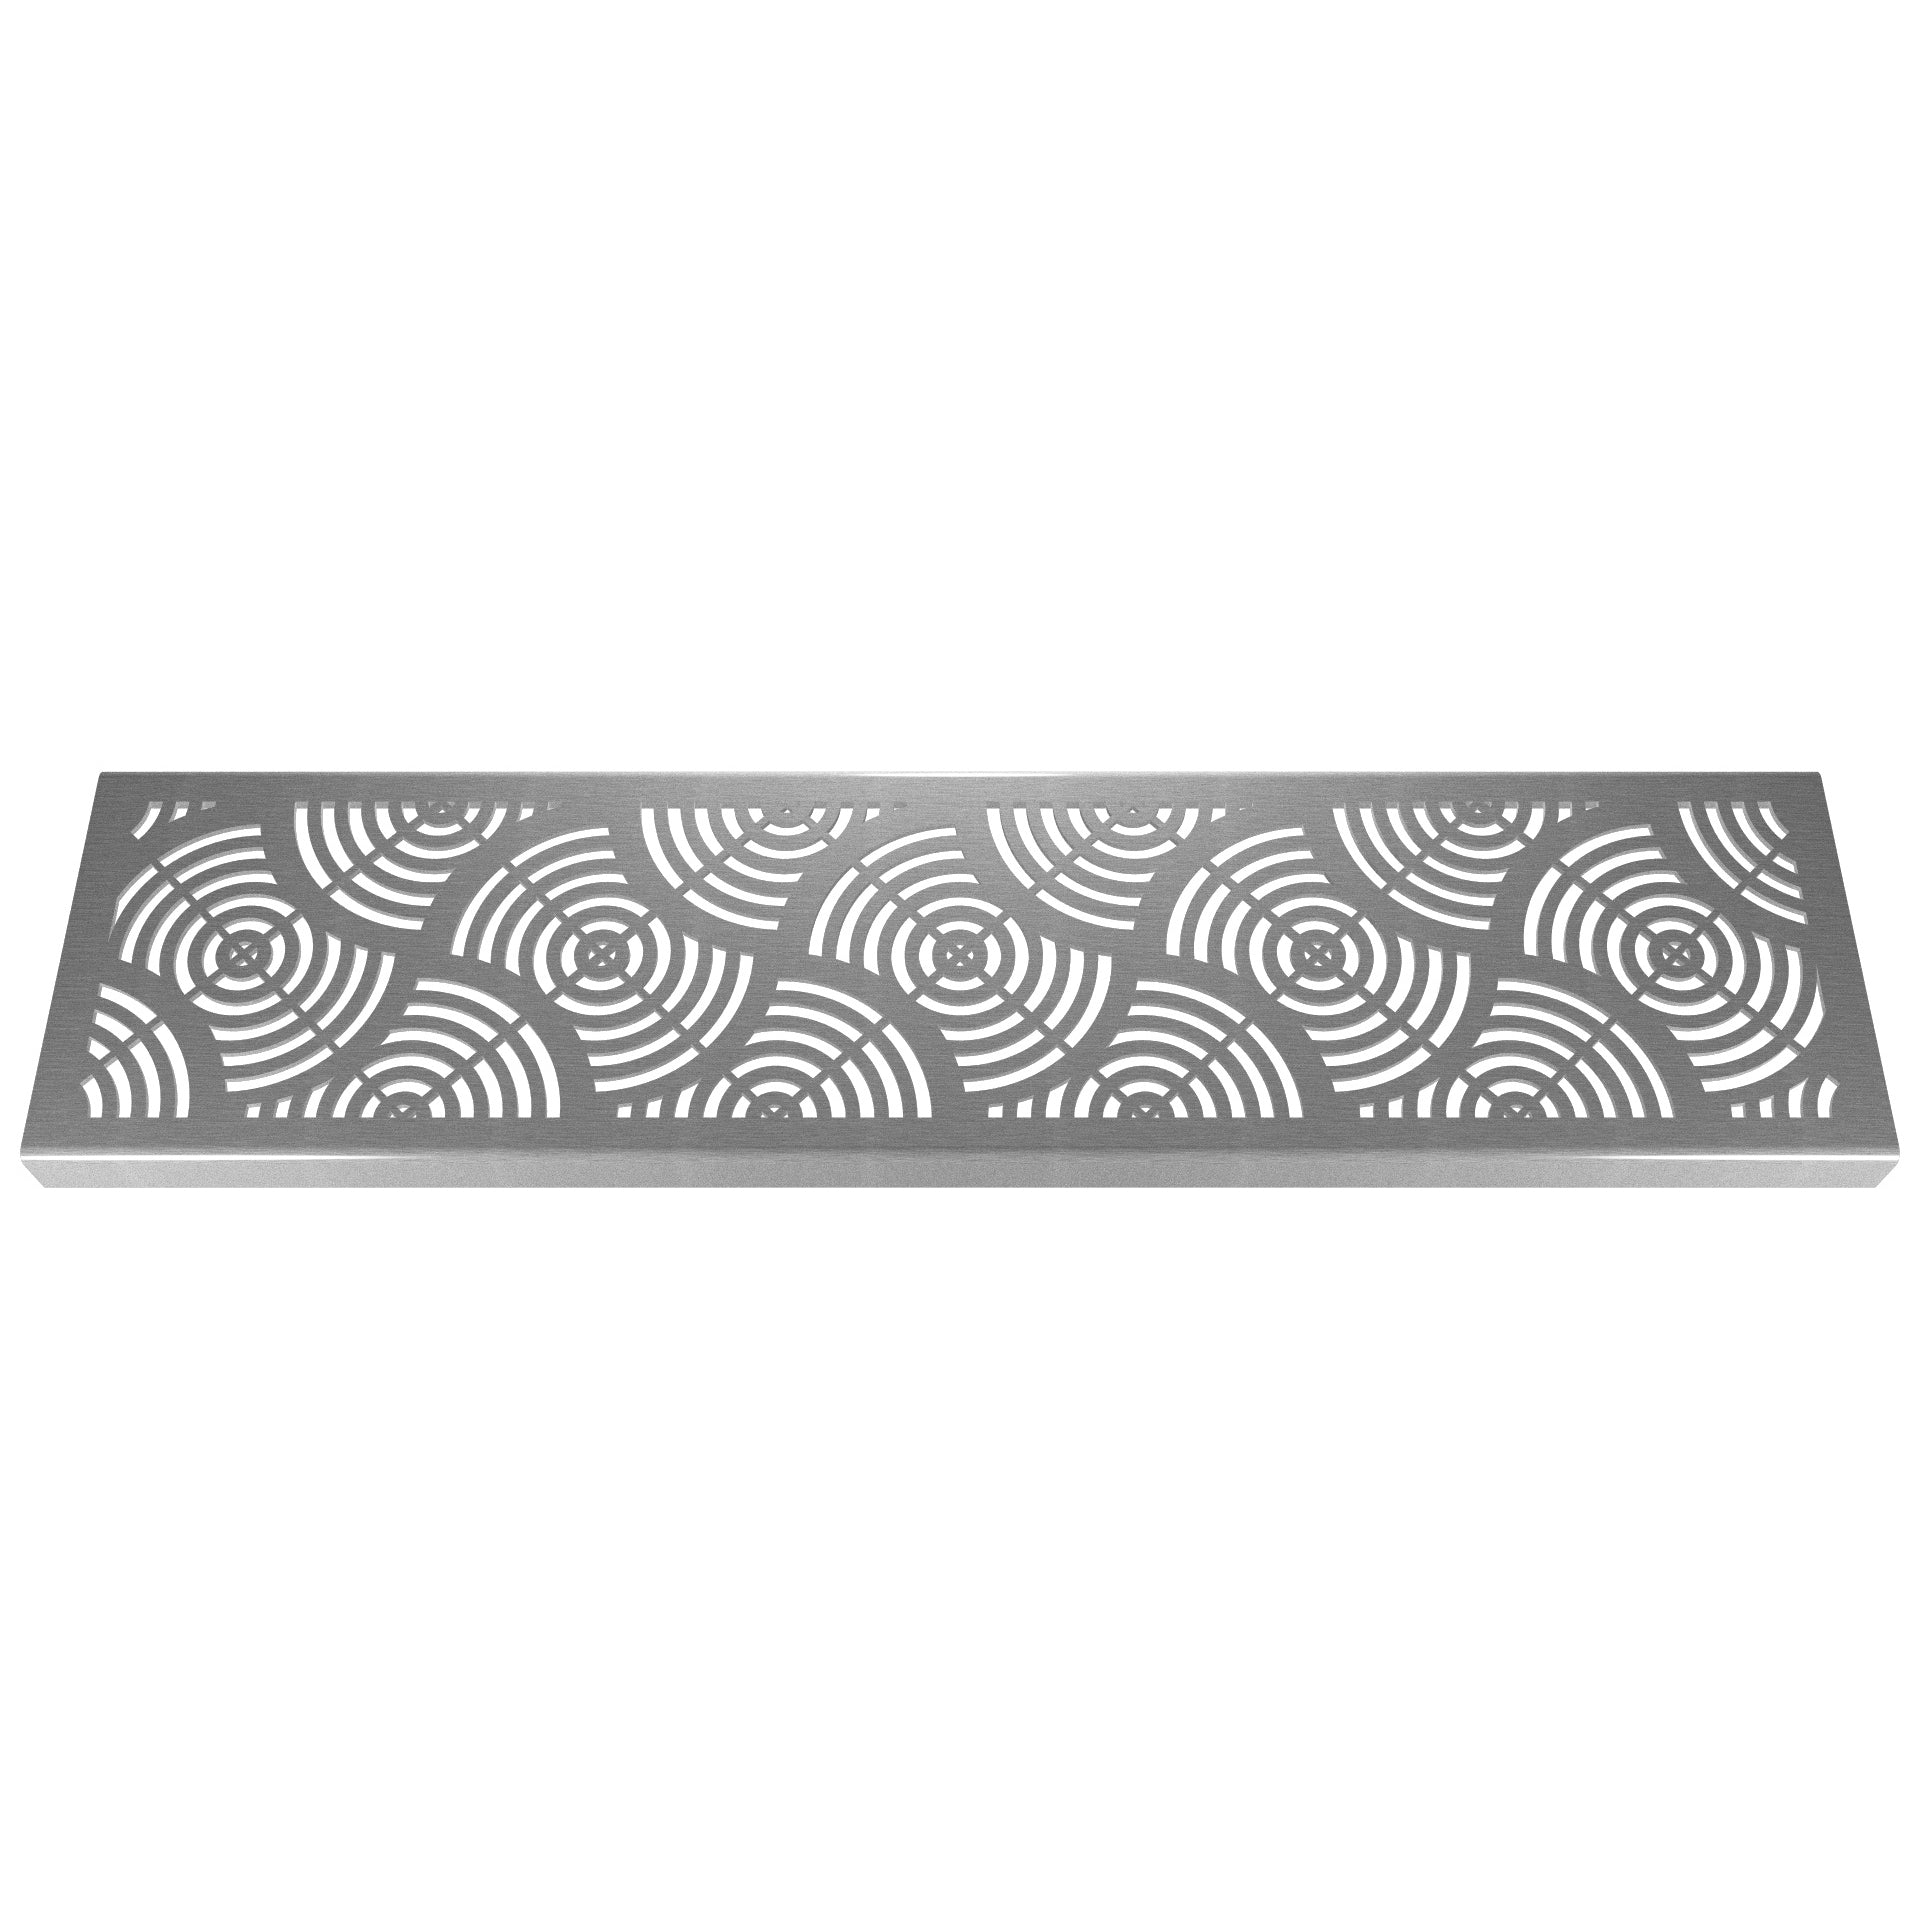 Waves 304 Stainless Steel Channel Drain Grate 125 x 1000mm (5 Inch)